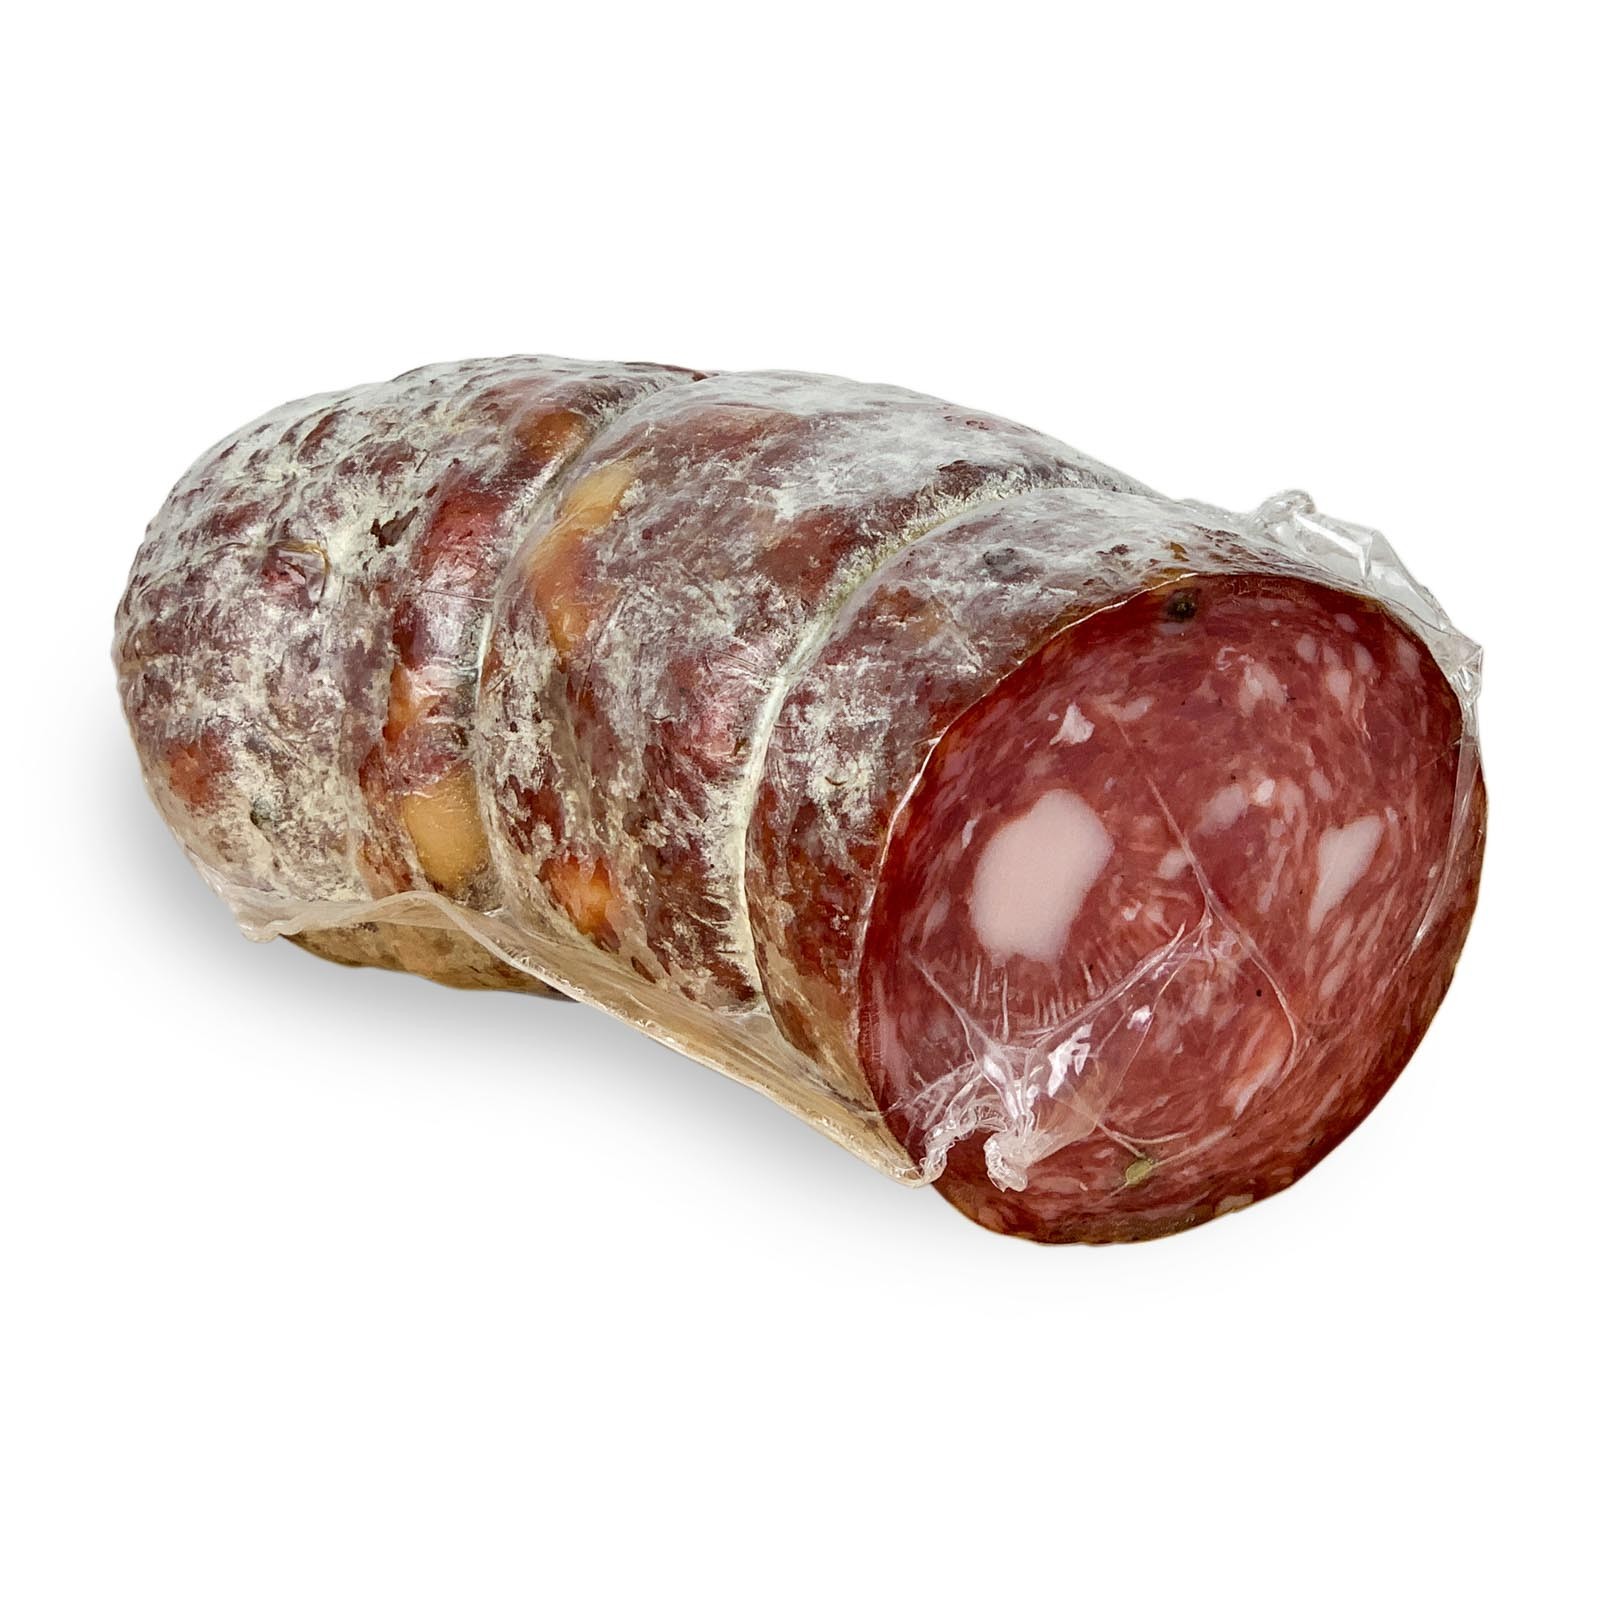 Tuscan Salami is an artisanal sausage typical of the Tuscan gastronomic tradition, made according to an ancient recipe handed down for centuries. It is characterized by a soft and compact consistency, bright red color and a particularly intense taste, enriched with spices and aromas. This version of Tuscan Salami has a net weight of about 1 kg, is vacuum packed and is characterized by a large slice of about 10 centimeters in diameter.